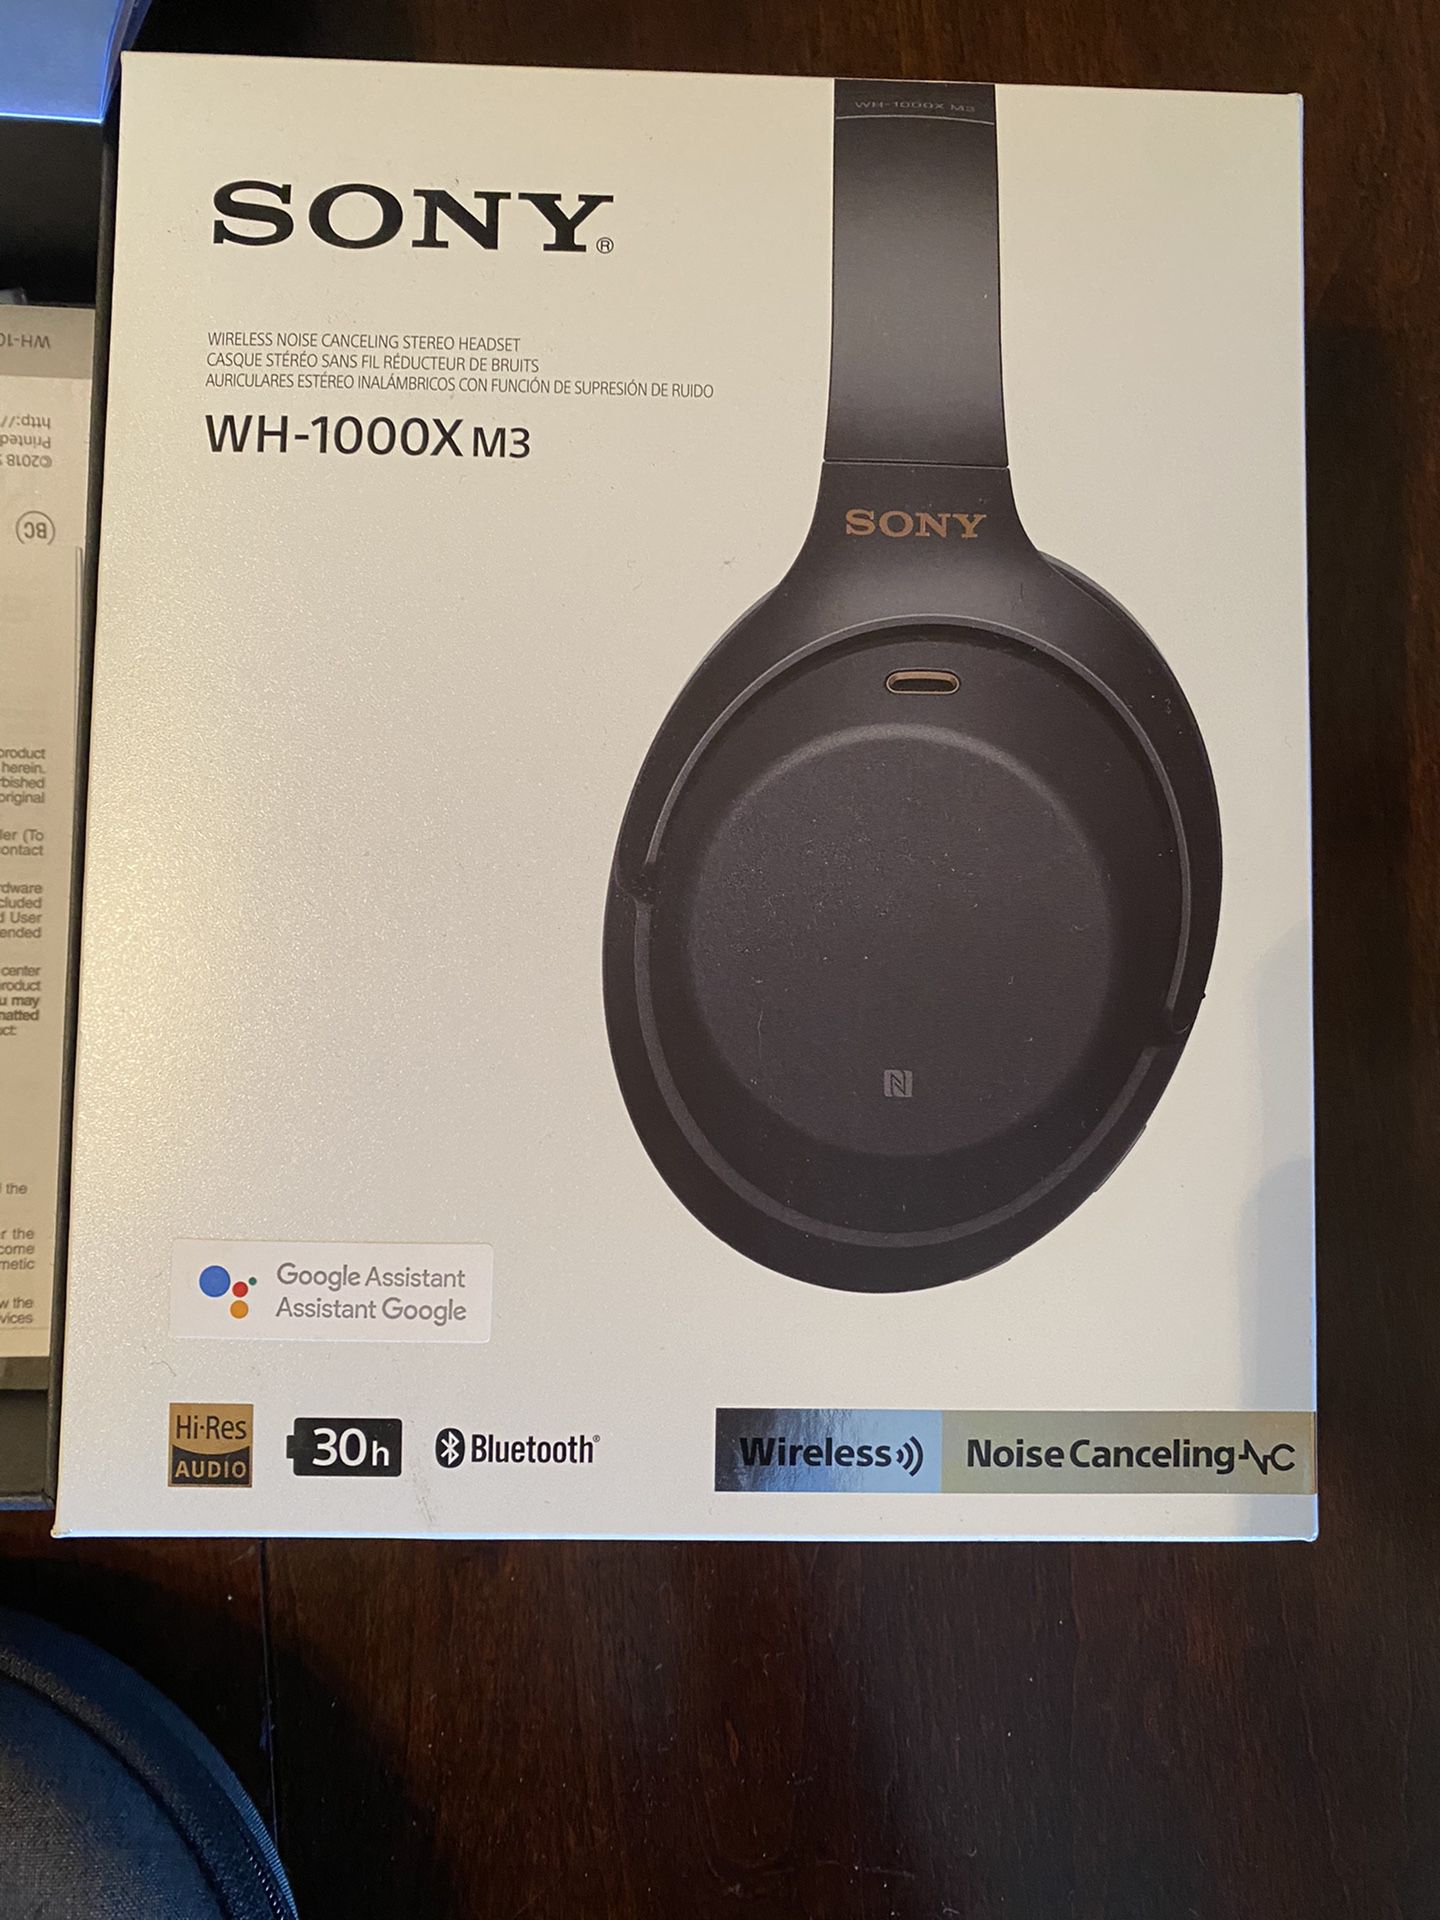 Sony WH1000XM3 Wireless Industry Leading Noise Canceling Over Ear Headphones, Black (WH-1000XM3